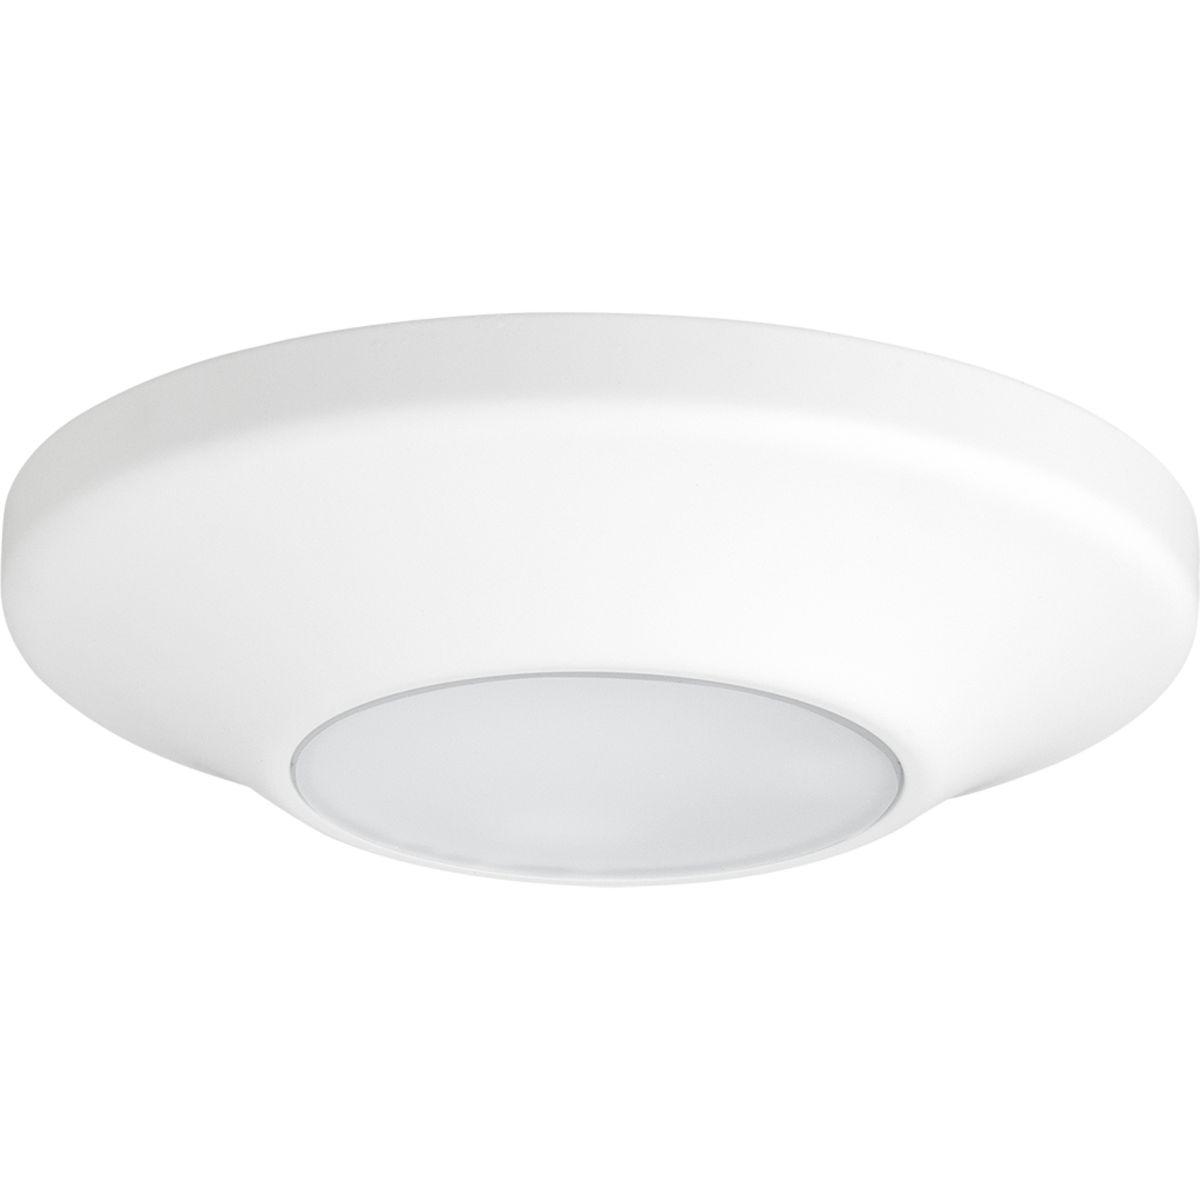 Hubbell HSFM5-WH-30K9 The HSFM5 is ideal for use in both new construction as well as remodel/retrofit. Light output is comparable to that of a typical 60W incandescent downlight, providing 75 percent energy savings. The HSFM5 is wet location listed and is a cost effective solu